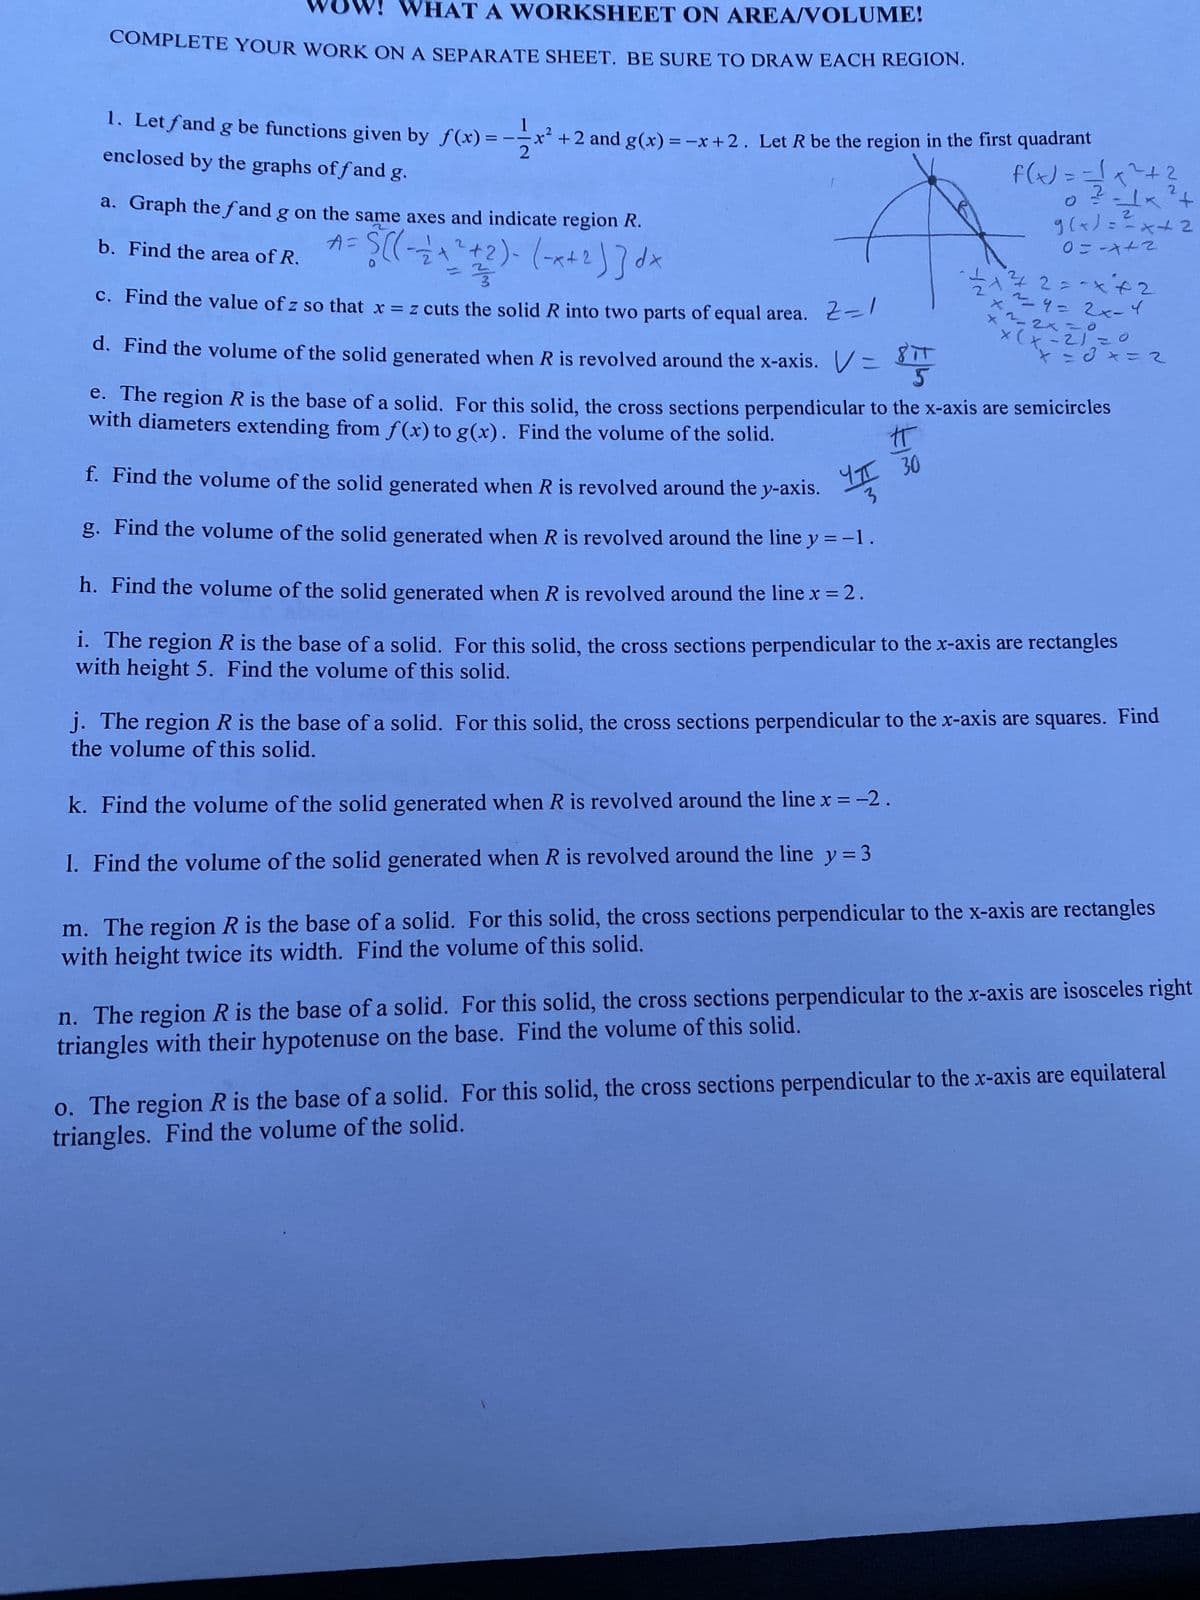 W! WHAT A WORKSHEET ON AREA/VOLUME!
COMPLETE YOUR WORK ON A SEPARATE SHEET. BE SURE TO DRAW EACH REGION.
1
1. Let fand g be functions given by f(x)=-=-x² +2 and g(x) = -x + 2. Let R be the region in the first quadrant
2
enclosed by the graphs off and g.
a. Graph the fand g on the same axes and indicate region R.
A =
S((--/+ ²+2)-(-x+2) ]dx
b. Find the area of R.
- ²/3
Z=1
c. Find the value of z so that x = z cuts the solid R into two parts of equal area.
d. Find the volume of the solid generated when R is revolved around the x-axis. V=
f. Find the volume of the solid generated when R is revolved around the y-axis. I 30
3
g. Find the volume of the solid generated when R is revolved around the line y = -1.
-2
f(x) = =√x ² + ²
2-1×²+
24
g(x)==x+2
0=-x+2
42
- 1/21/²²/2 = -x ² + 2
x²=9=2x-4
k. Find the volume of the solid generated when R is revolved around the line x = -2.
1. Find the volume of the solid generated when R is revolved around the line y = 3
x ²2 x 210
x (x
x=0x=2
5
IT
e. The region R is the base of a solid. For this solid, the cross sections perpendicular to the x-axis are semicircles
with diameters extending from f(x) to g(x). Find the volume of the solid.
h. Find the volume of the solid generated when R is revolved around the line x = 2.
i. The region R is the base of a solid. For this solid, the cross sections perpendicular to the x-axis are rectangles
with height 5. Find the volume of this solid.
j. The region R is the base of a solid. For this solid, the cross sections perpendicular to the x-axis are squares. Find
the volume of this solid.
m. The region R is the base of a solid. For this solid, the cross sections perpendicular to the x-axis are rectangles
with height twice its width. Find the volume of this solid.
n. The region R is the base of a solid. For this solid, the cross sections perpendicular to the x-axis are isosceles right
triangles with their hypotenuse on the base. Find the volume of this solid.
o. The region R is the base of a solid. For this solid, the cross sections perpendicular to the x-axis are equilateral
triangles. Find the volume of the solid.